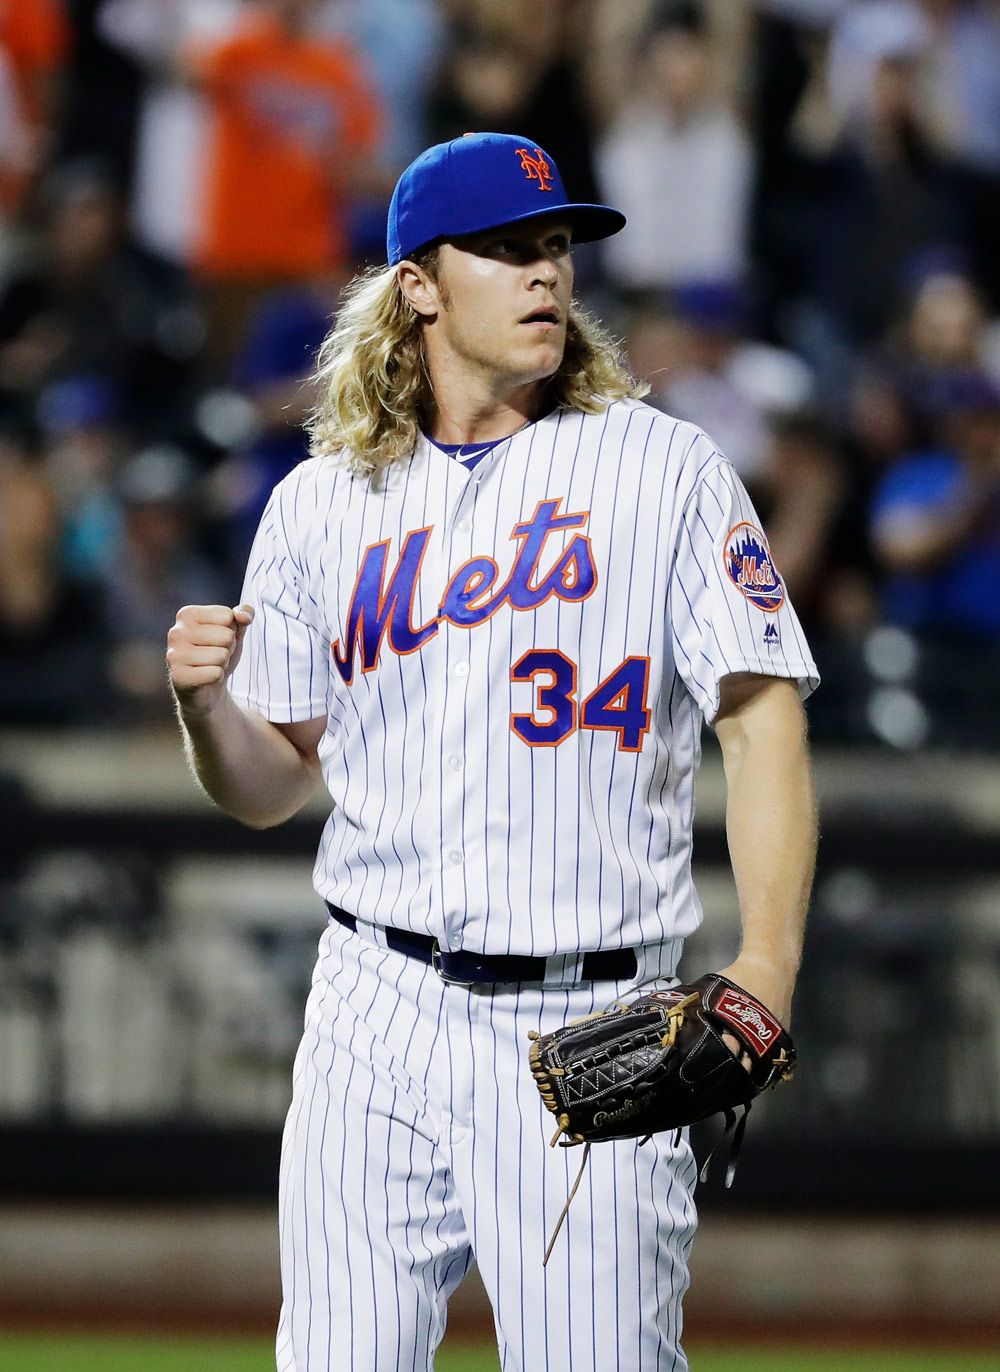 Noah Syndergaard and Jacob DeGrom Talk Hair Care, Man Buns and